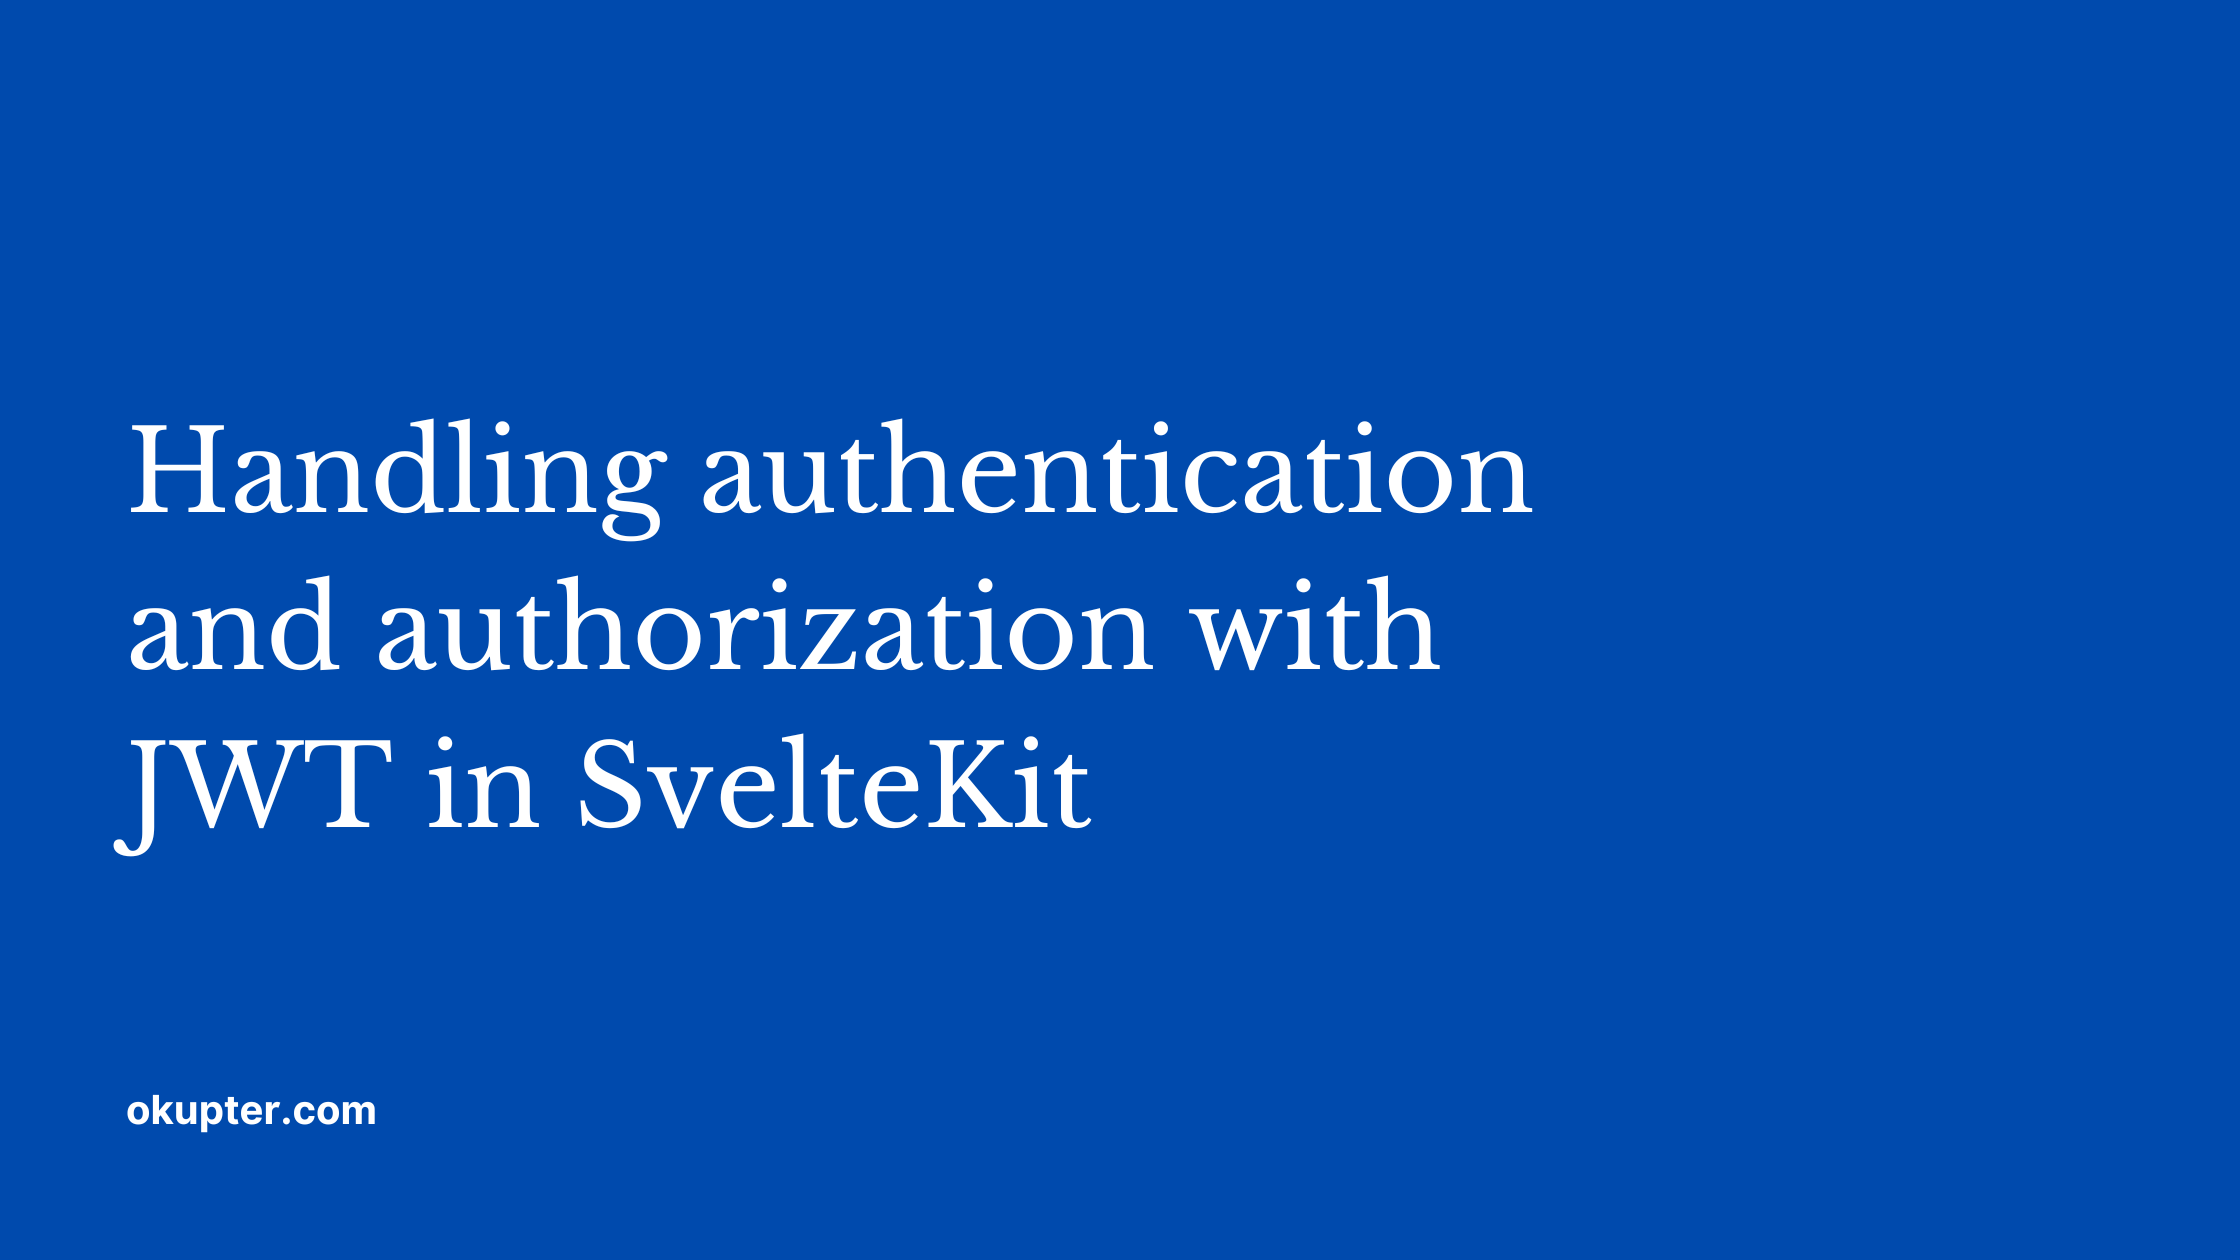 Handling authentication and authorization with JWT in SvelteKit